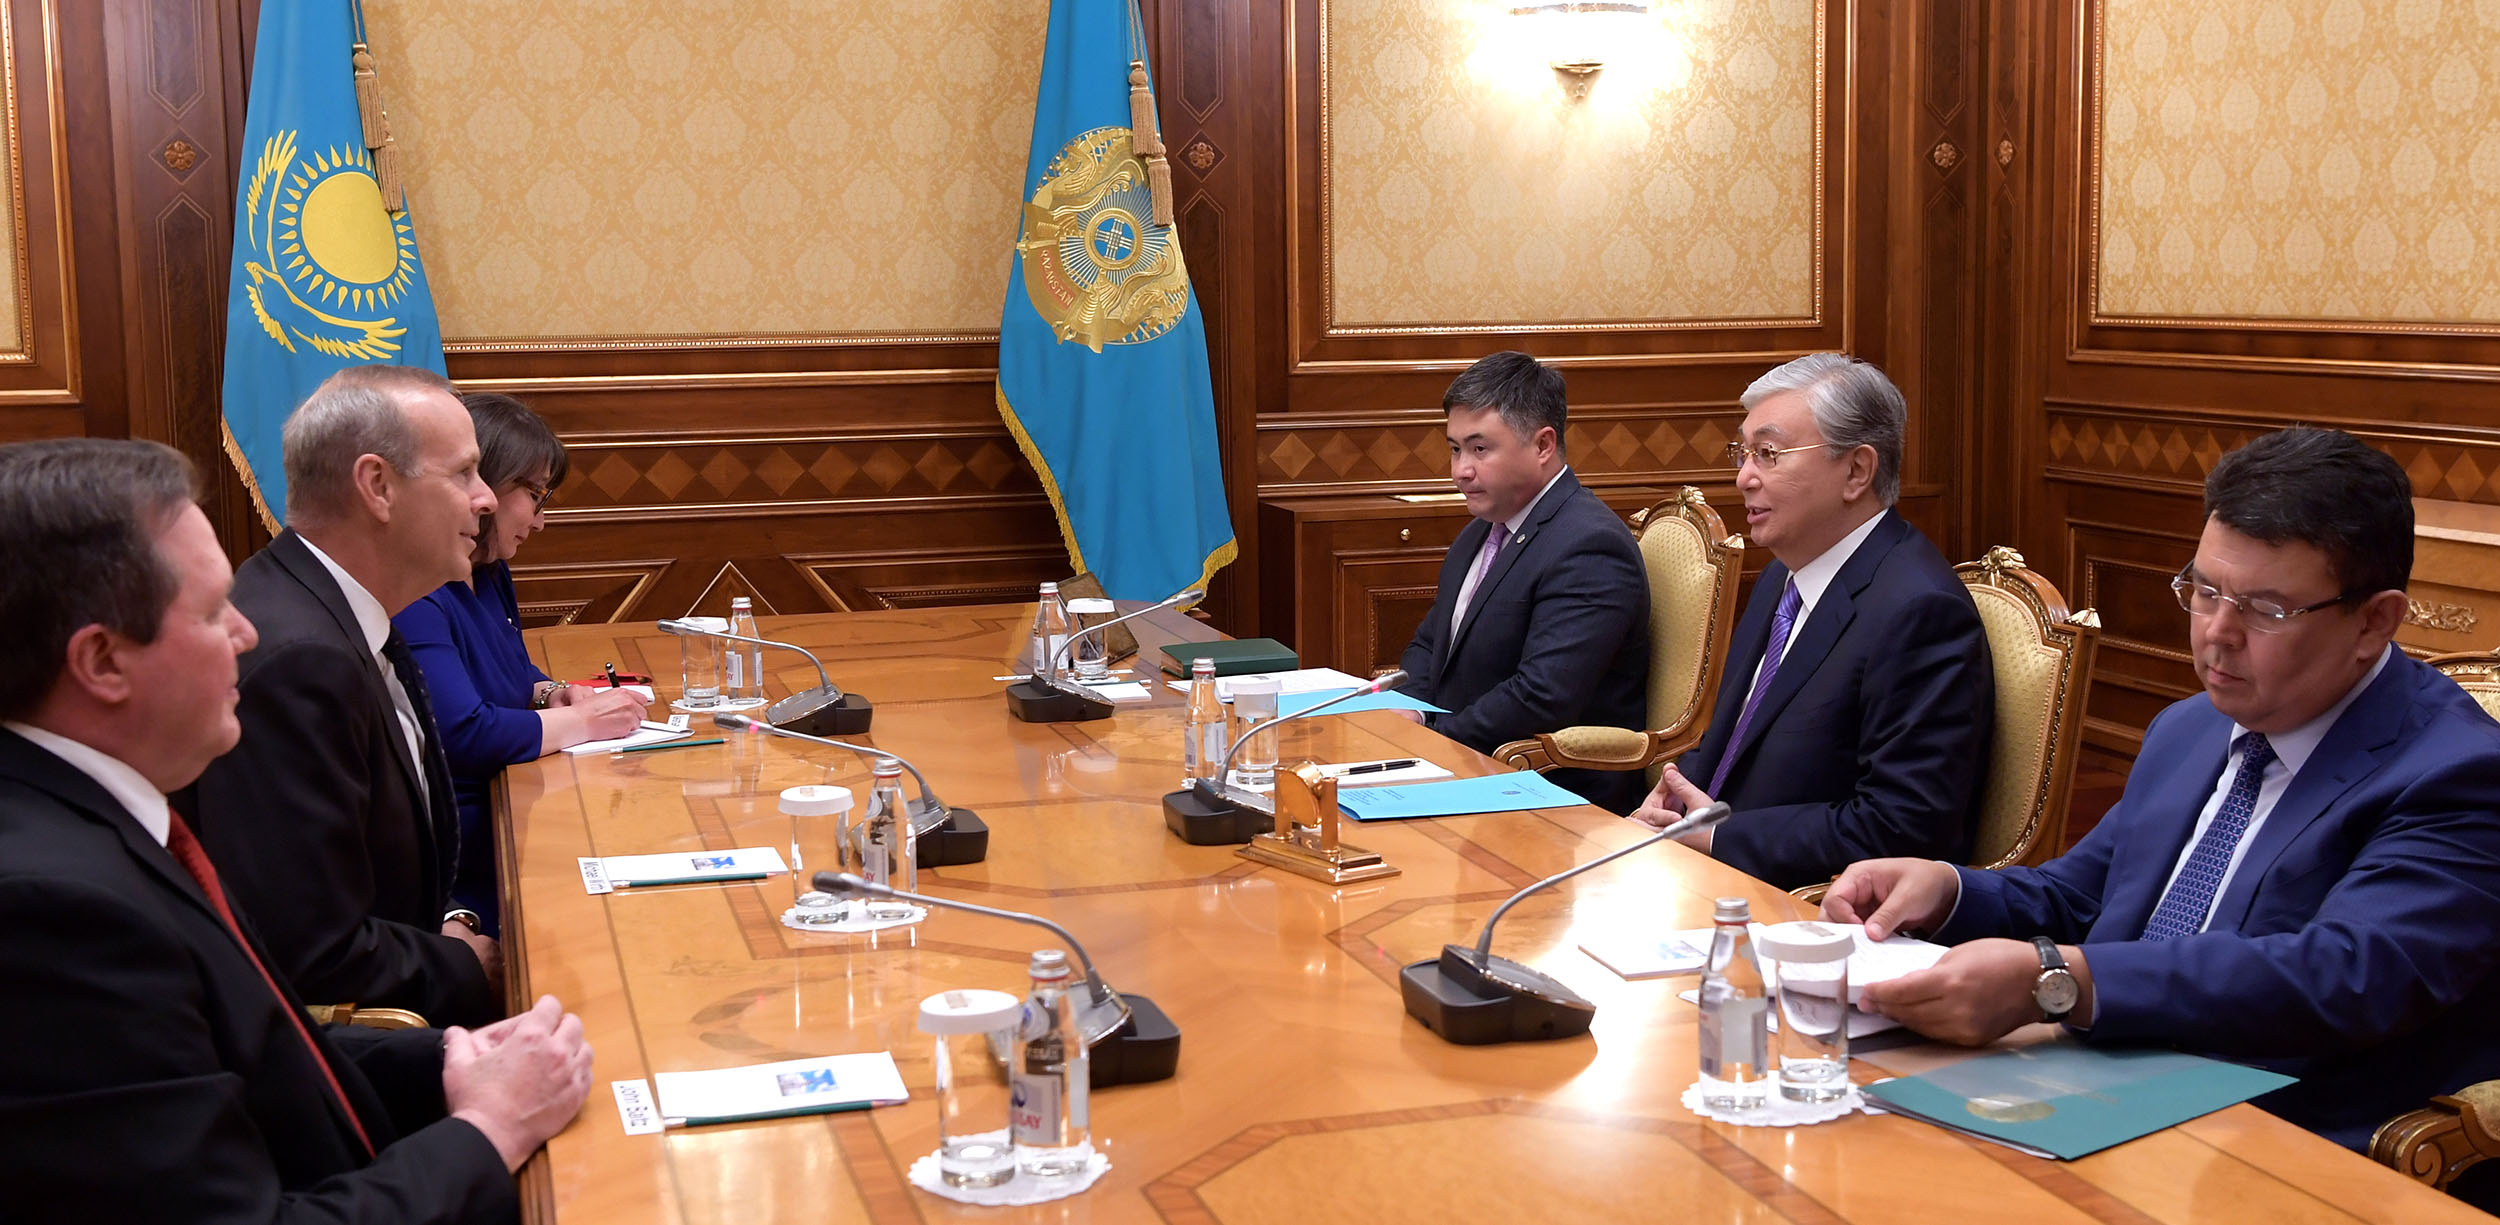 Kassym-Jomart Tokayev receives Michael Wirth, Chairman of the Board and Chief Executive Officer of Chevron Corporation